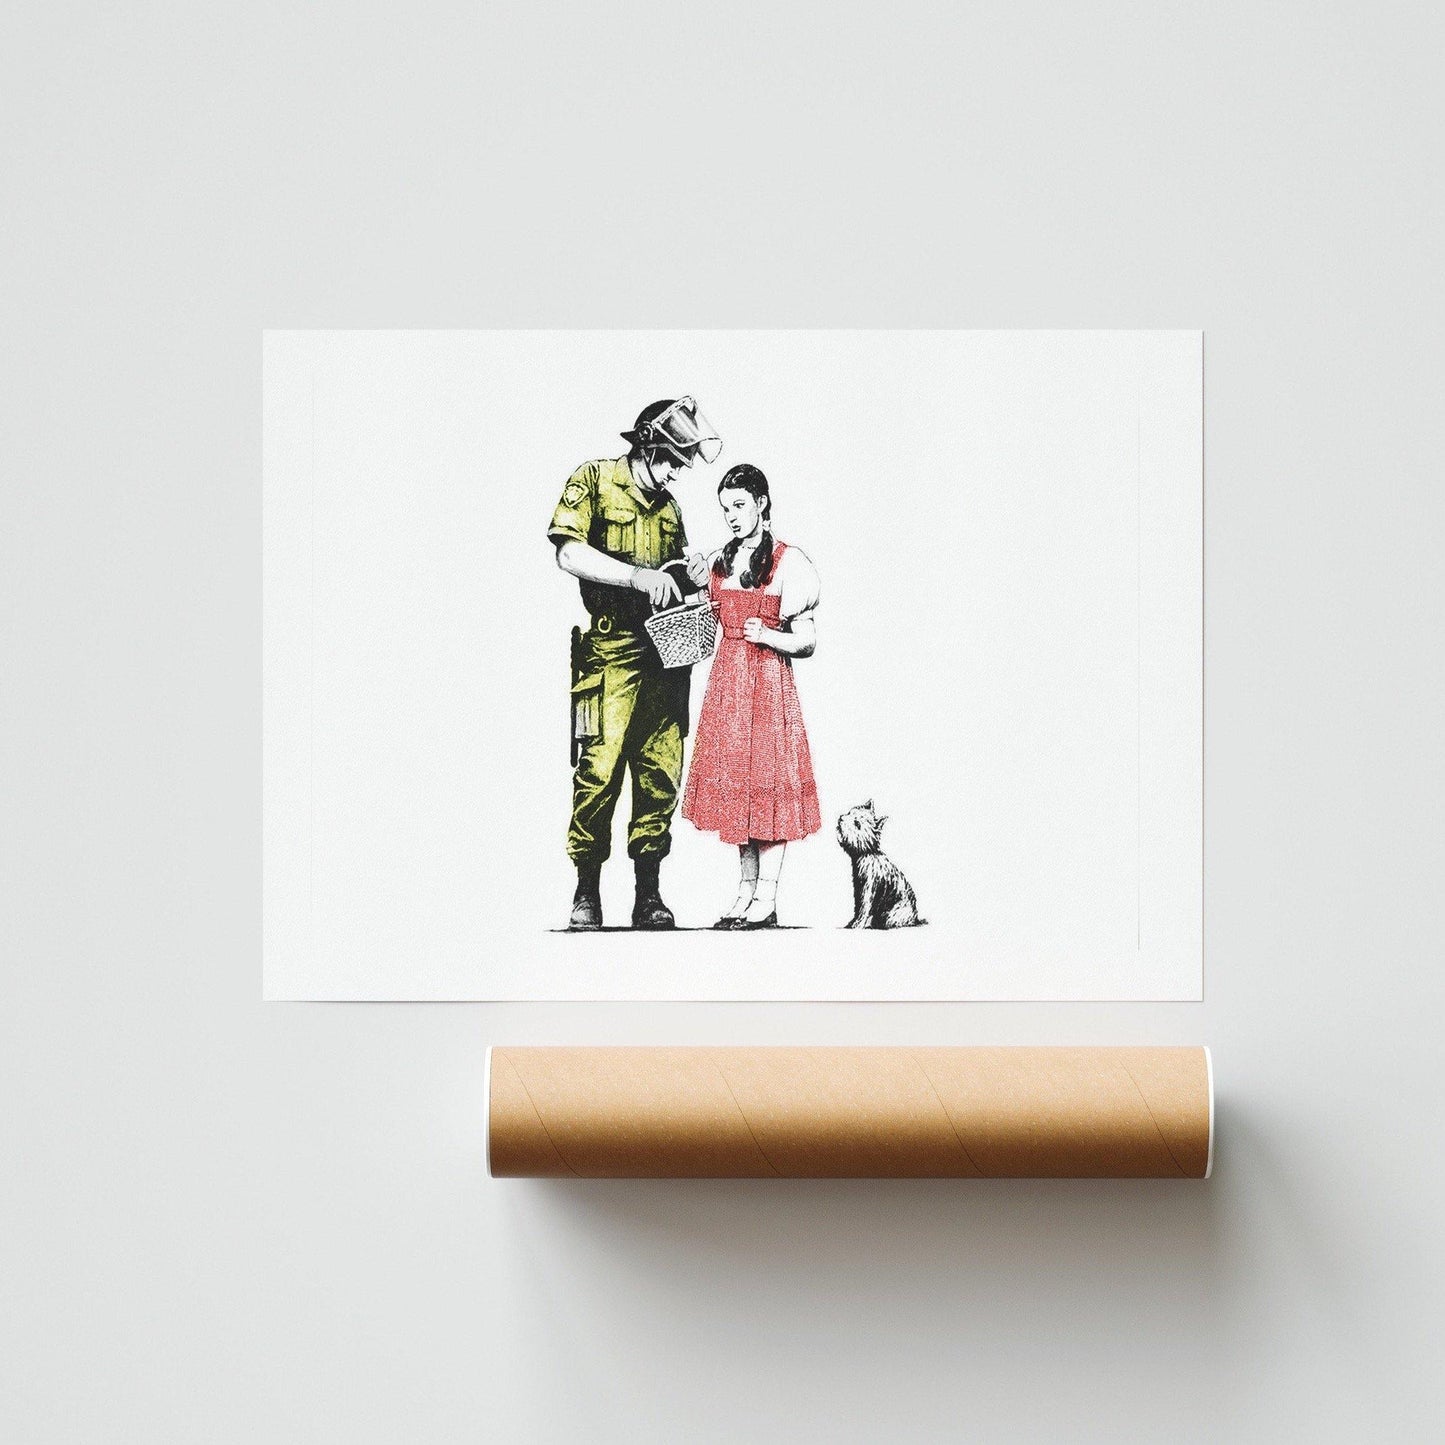 Have you ever wanted to own a piece of Banksy? Well, now's your chance. This Banksy Street Art Dorothy Search print is the perfect addition to any room. Hang it in your office to show off your street art cred or in your home as a conversation starter. No matter where you put it, this print is sure to add some personality to your space. 98types